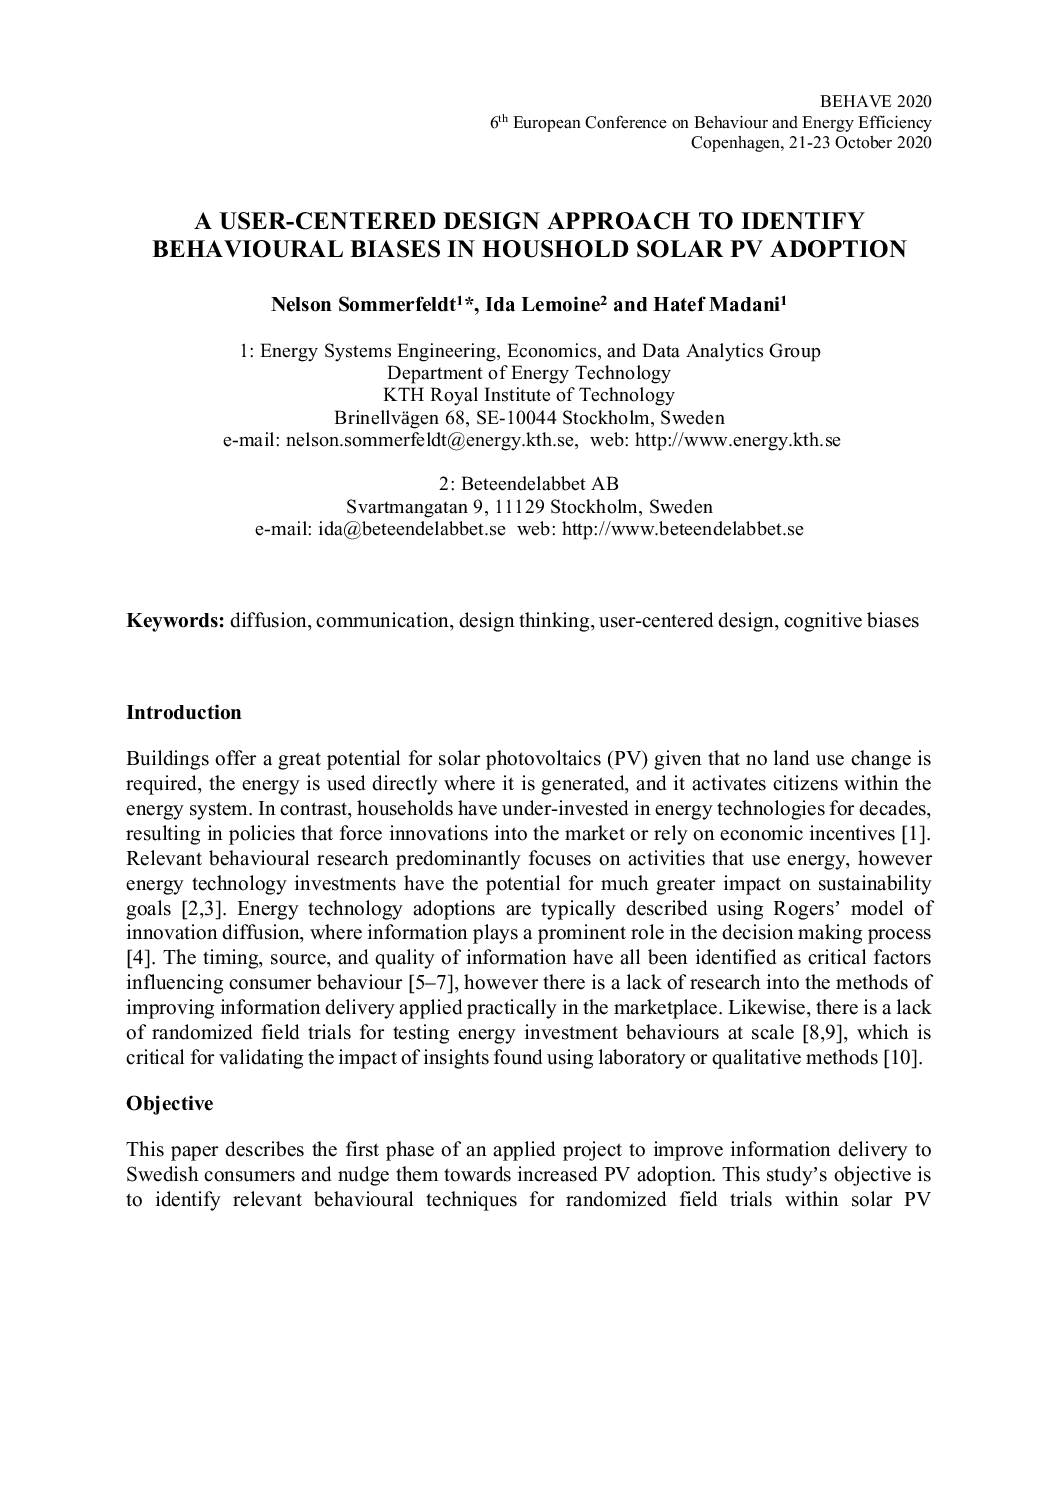 A user-centered design approach to identify behavioural biases in household solar PV adoption